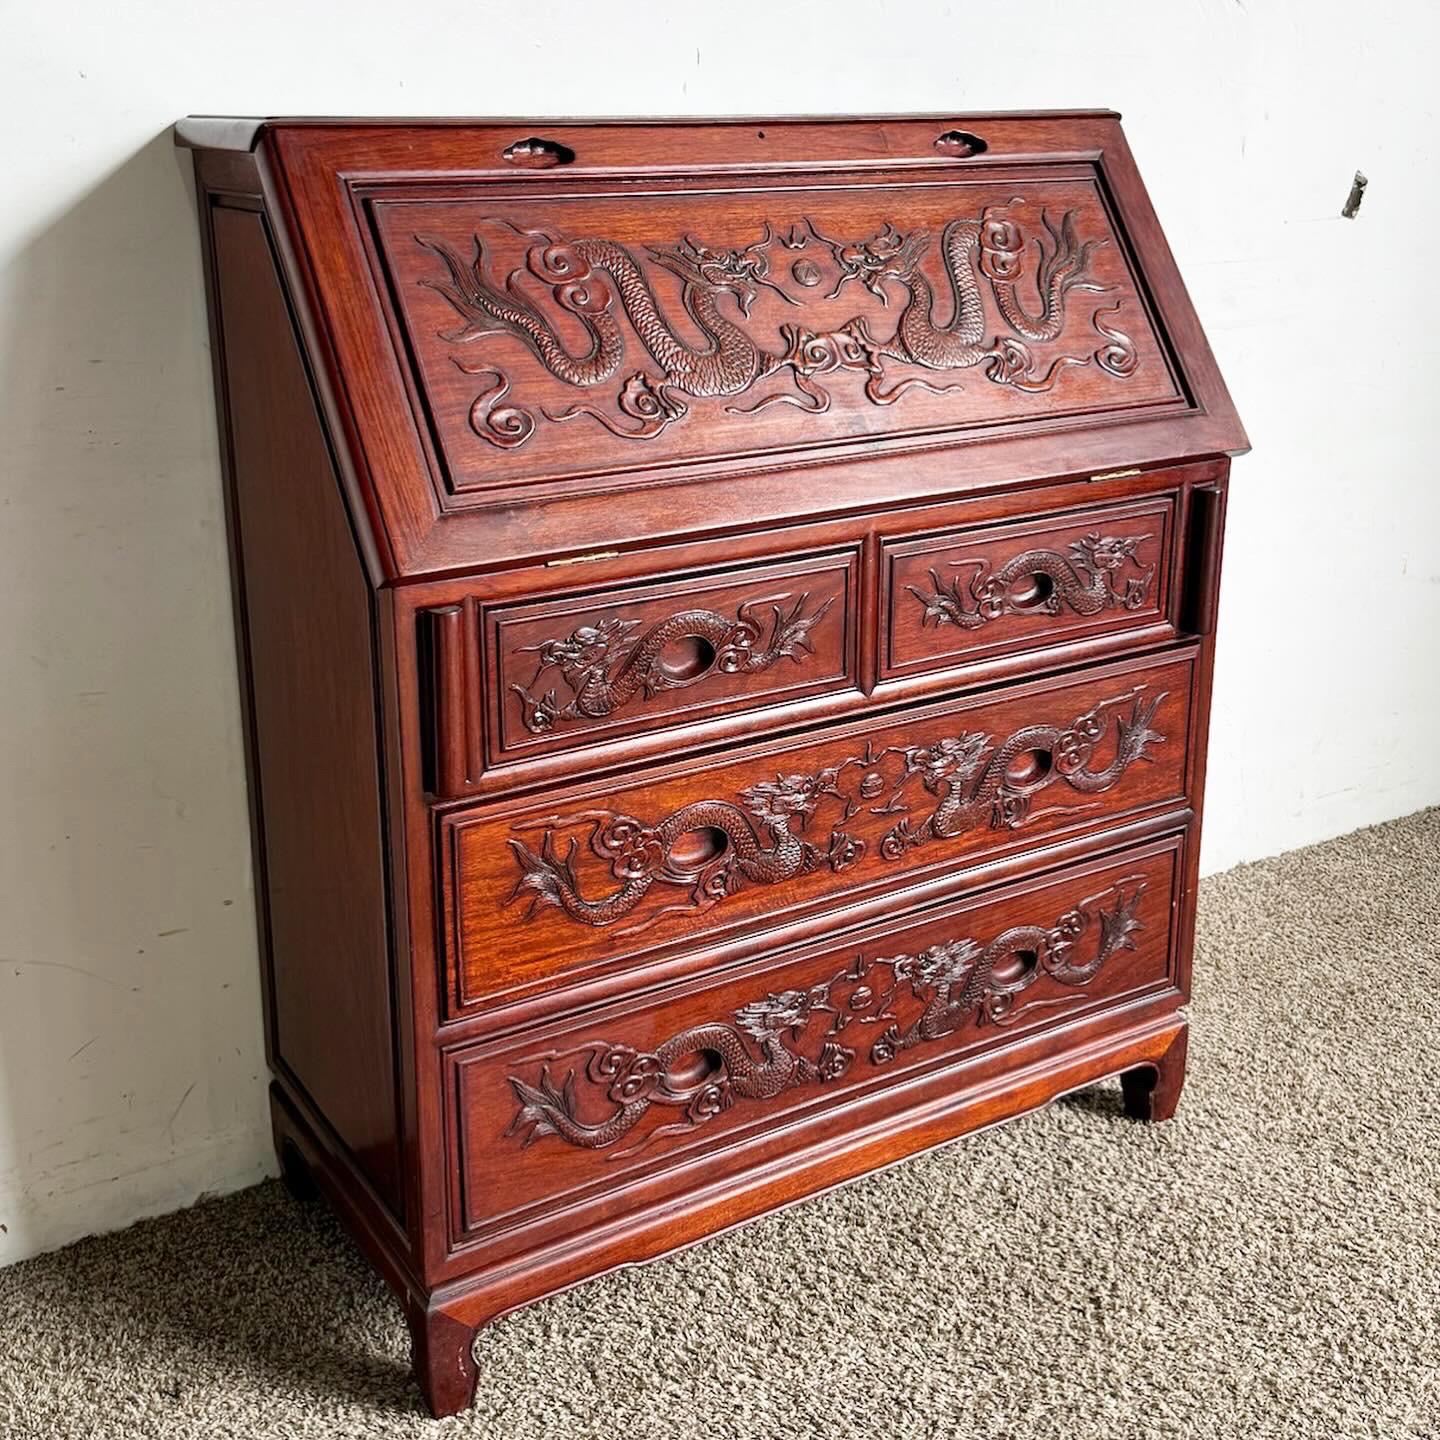 The Vintage Chinese Hand Carved Cherry Finished Secretary Desk is a masterpiece of traditional Chinese craftsmanship. Adorned with intricate dragon carvings, it features a rich cherry wood finish, enhancing its elegance. With three spacious drawers,